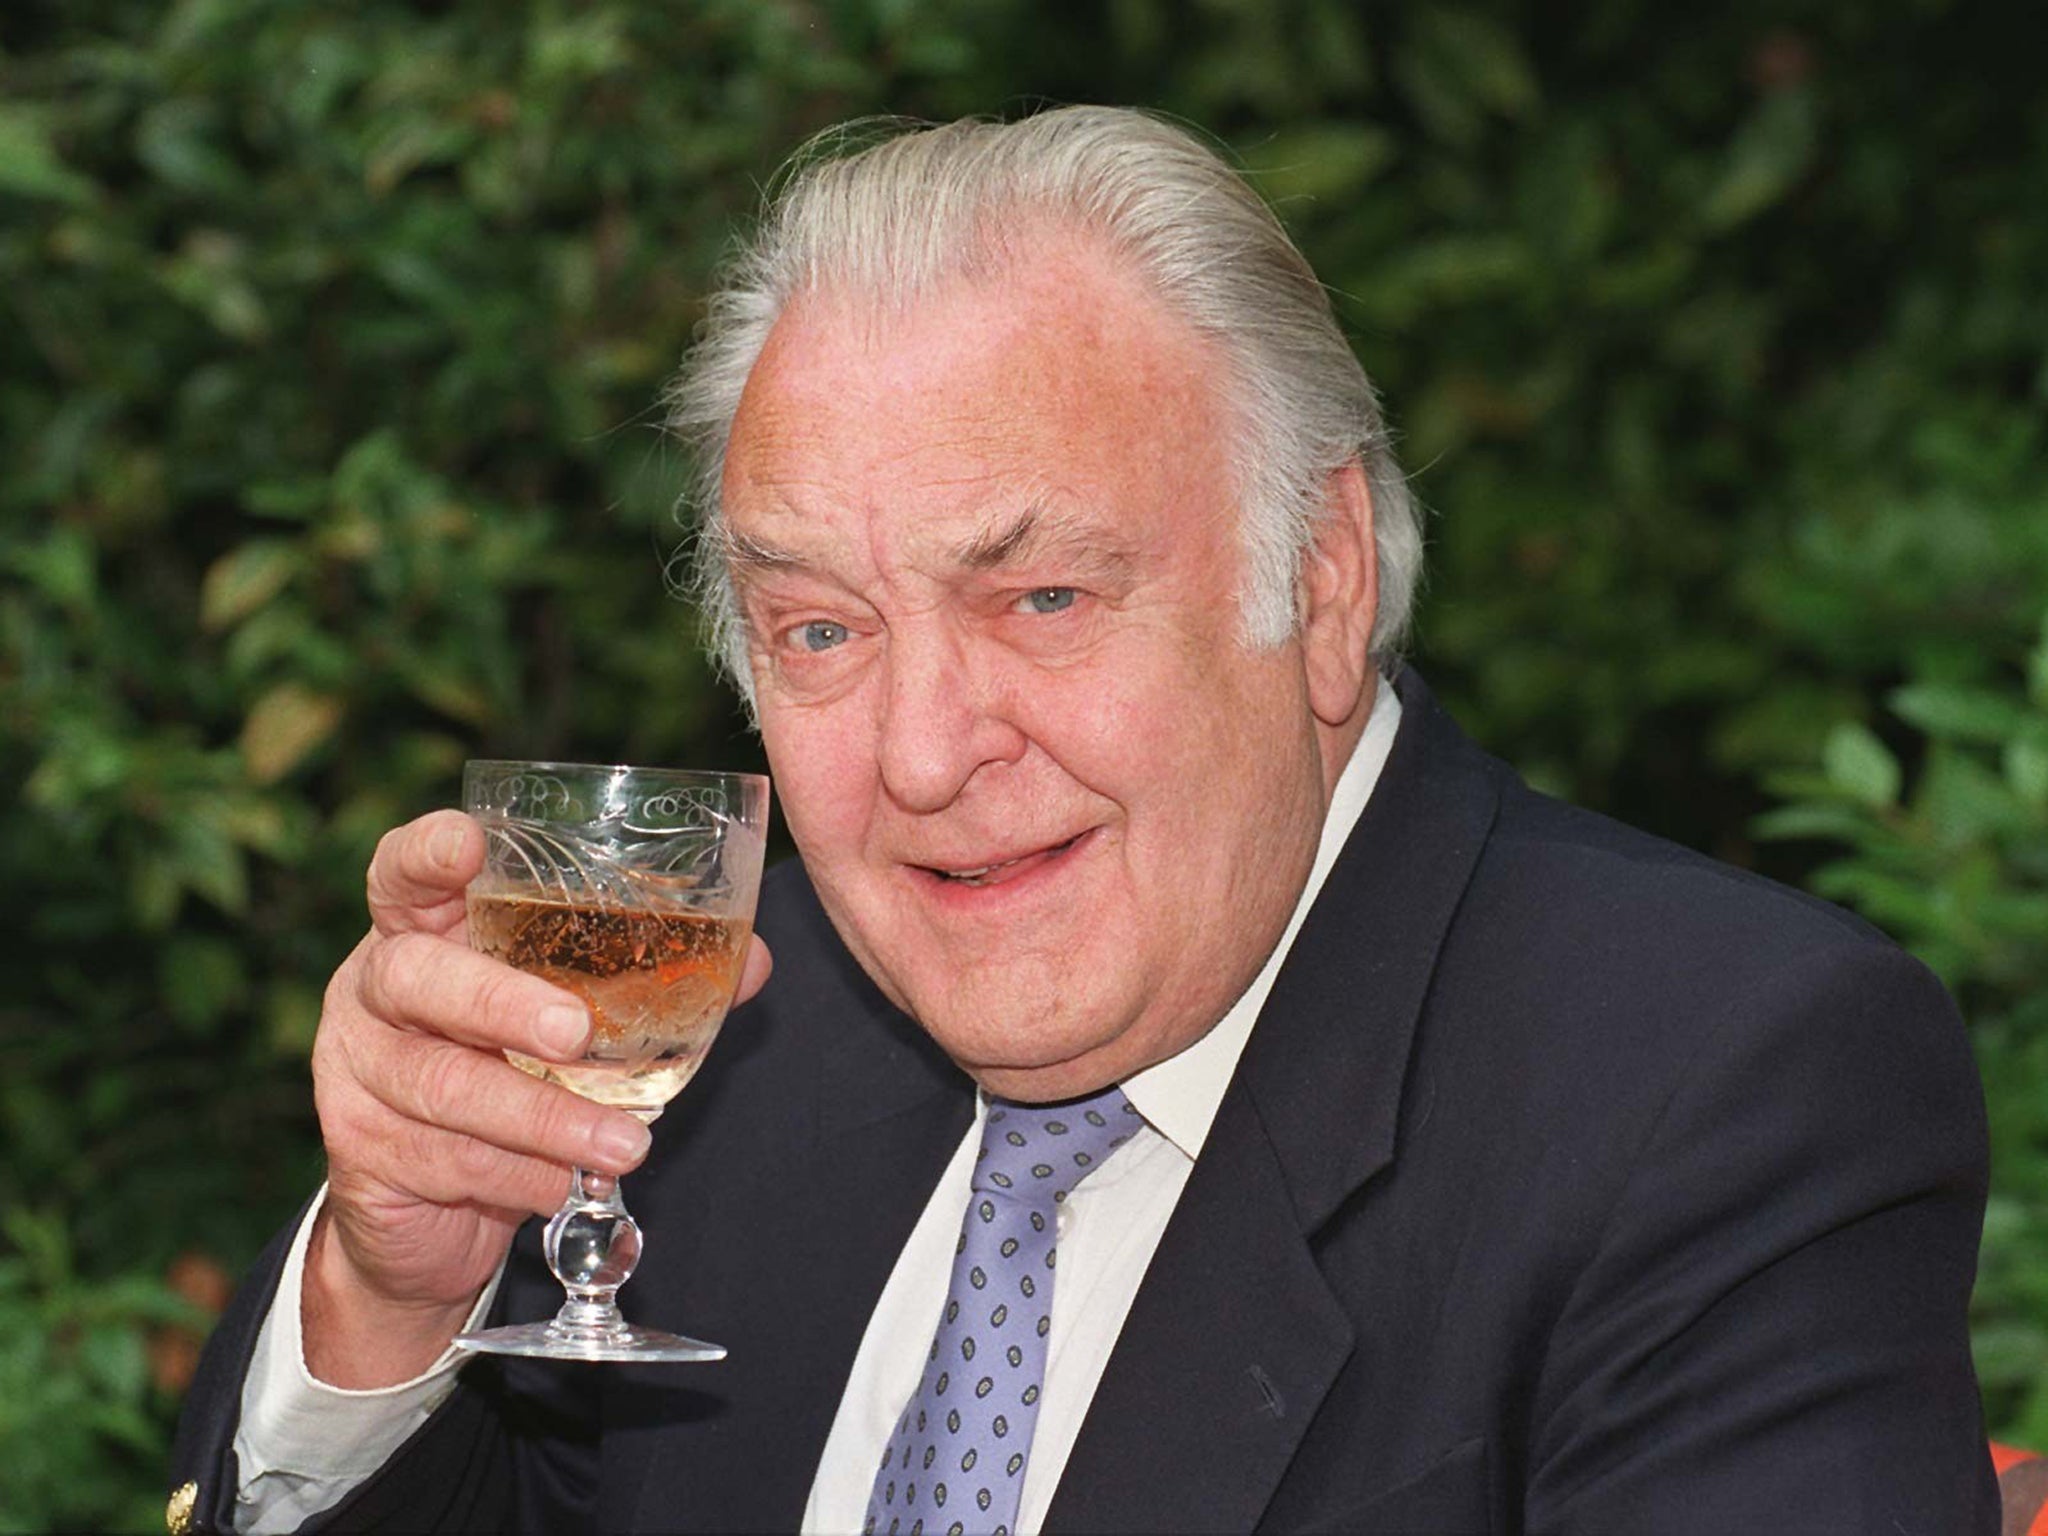 Donald Sinden was a godsend for television’s Spitting Image satire